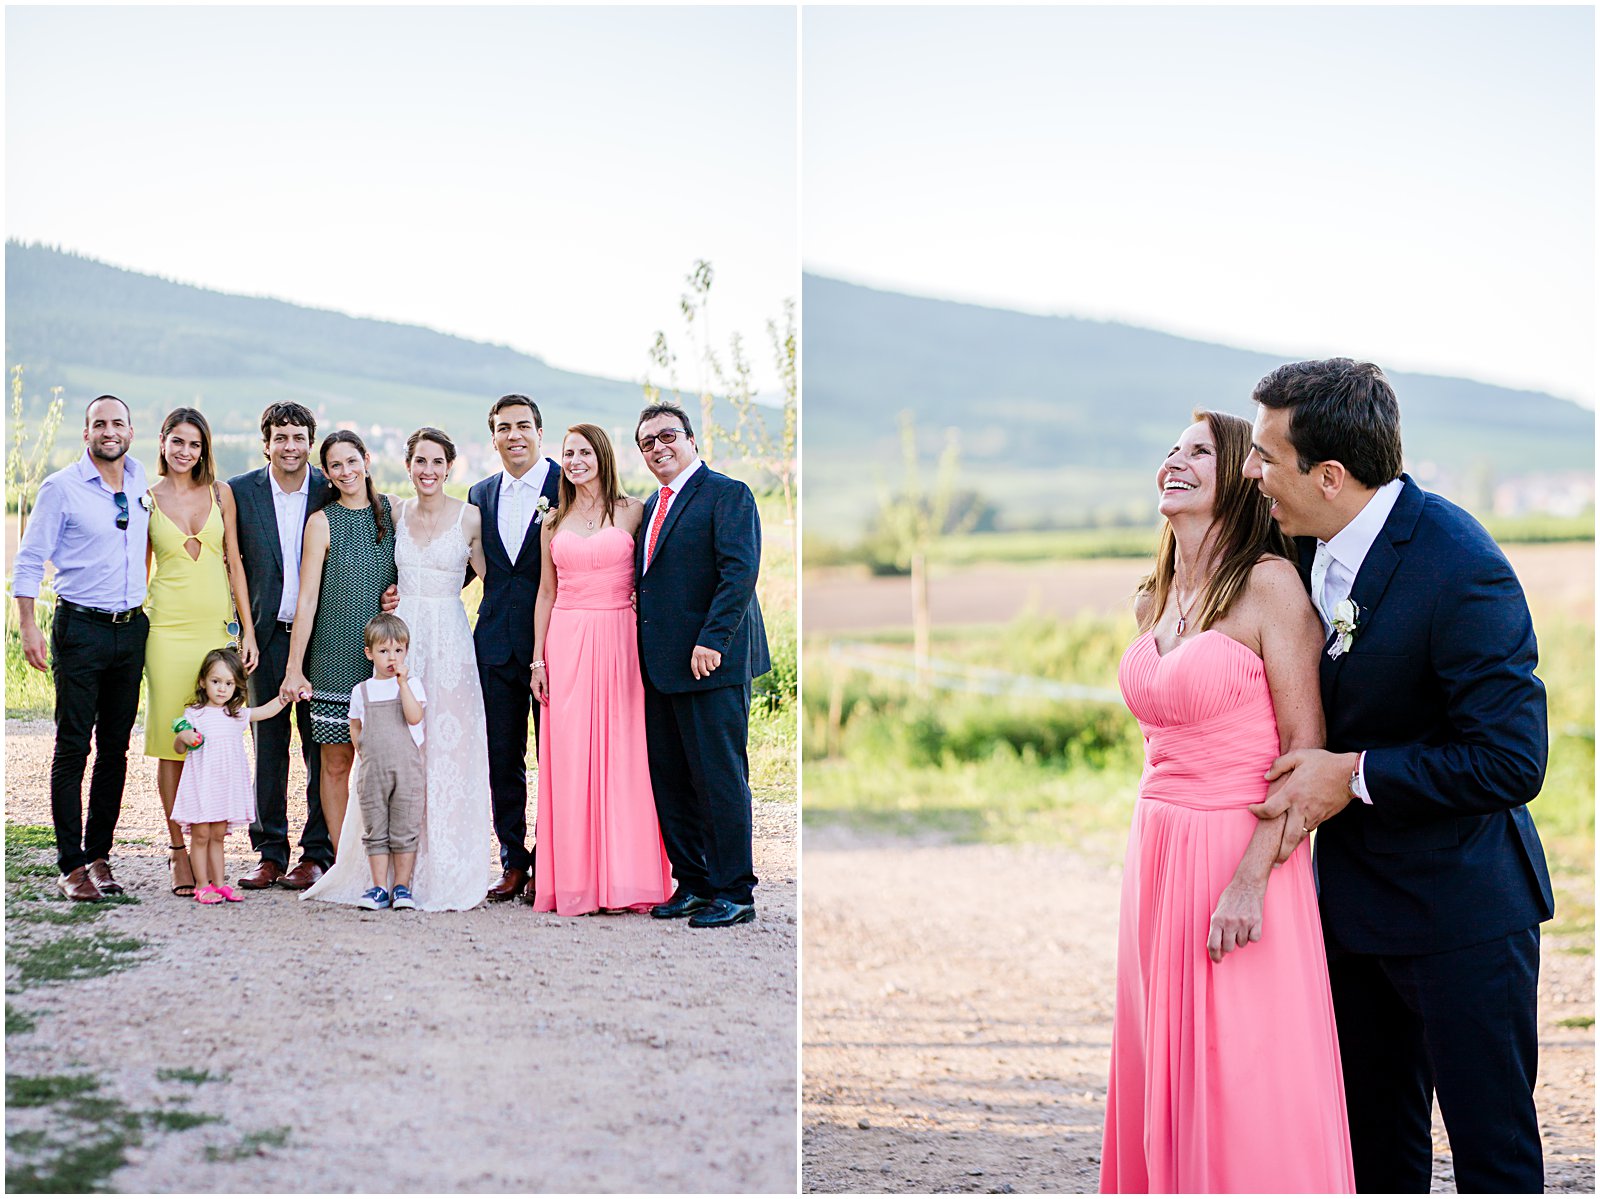 family photographed at wedding in Alsace France near Colmar by portrait wedding photographer Helena Woods